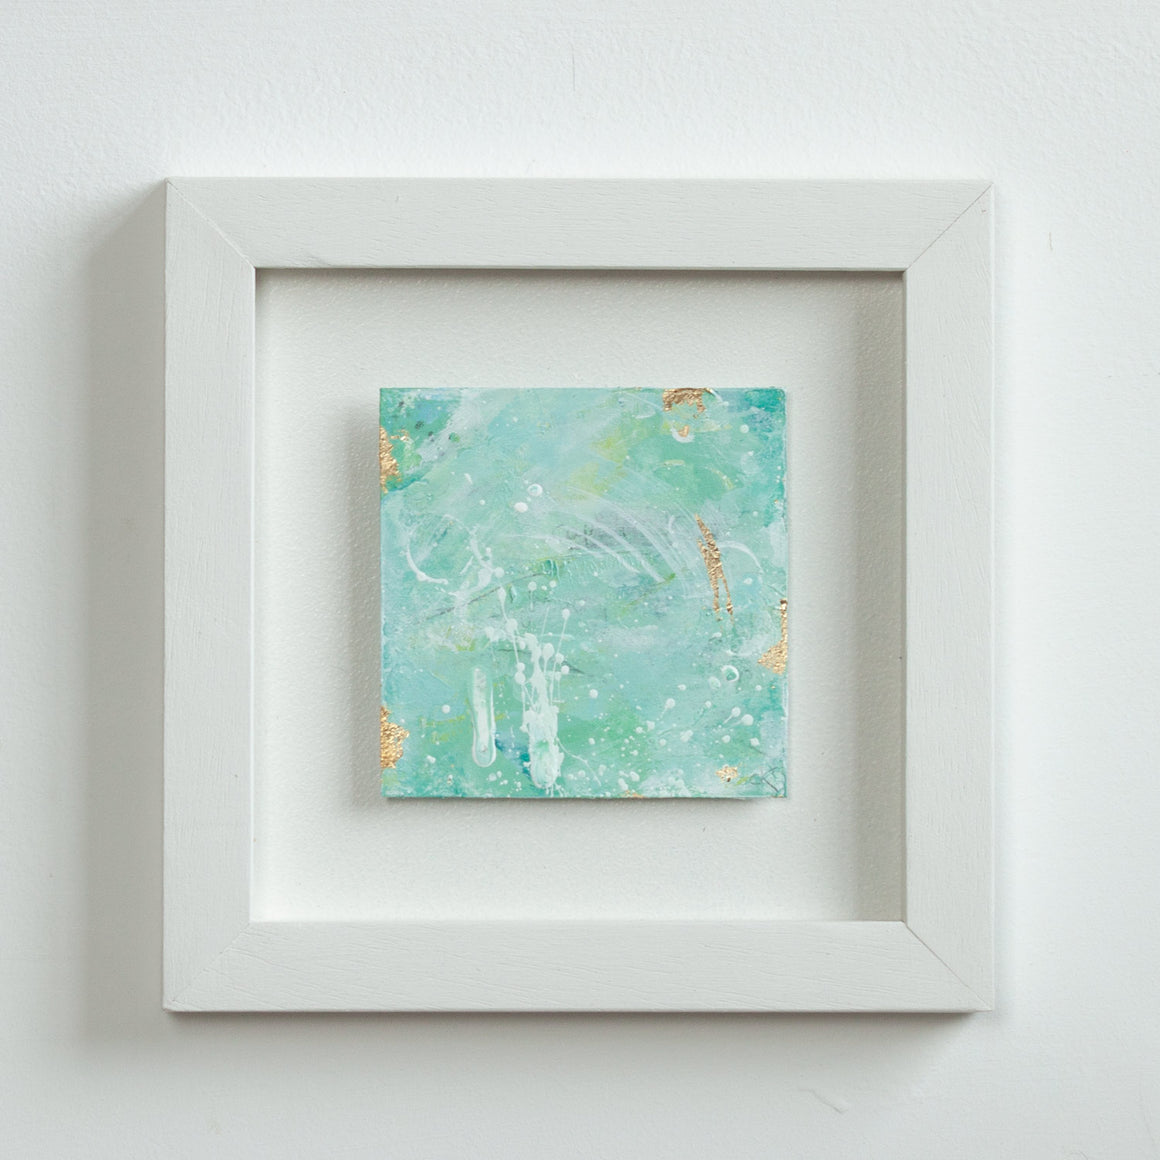 Captivated | Green Abstract Landscape Mini Painting 20cm x 20cm